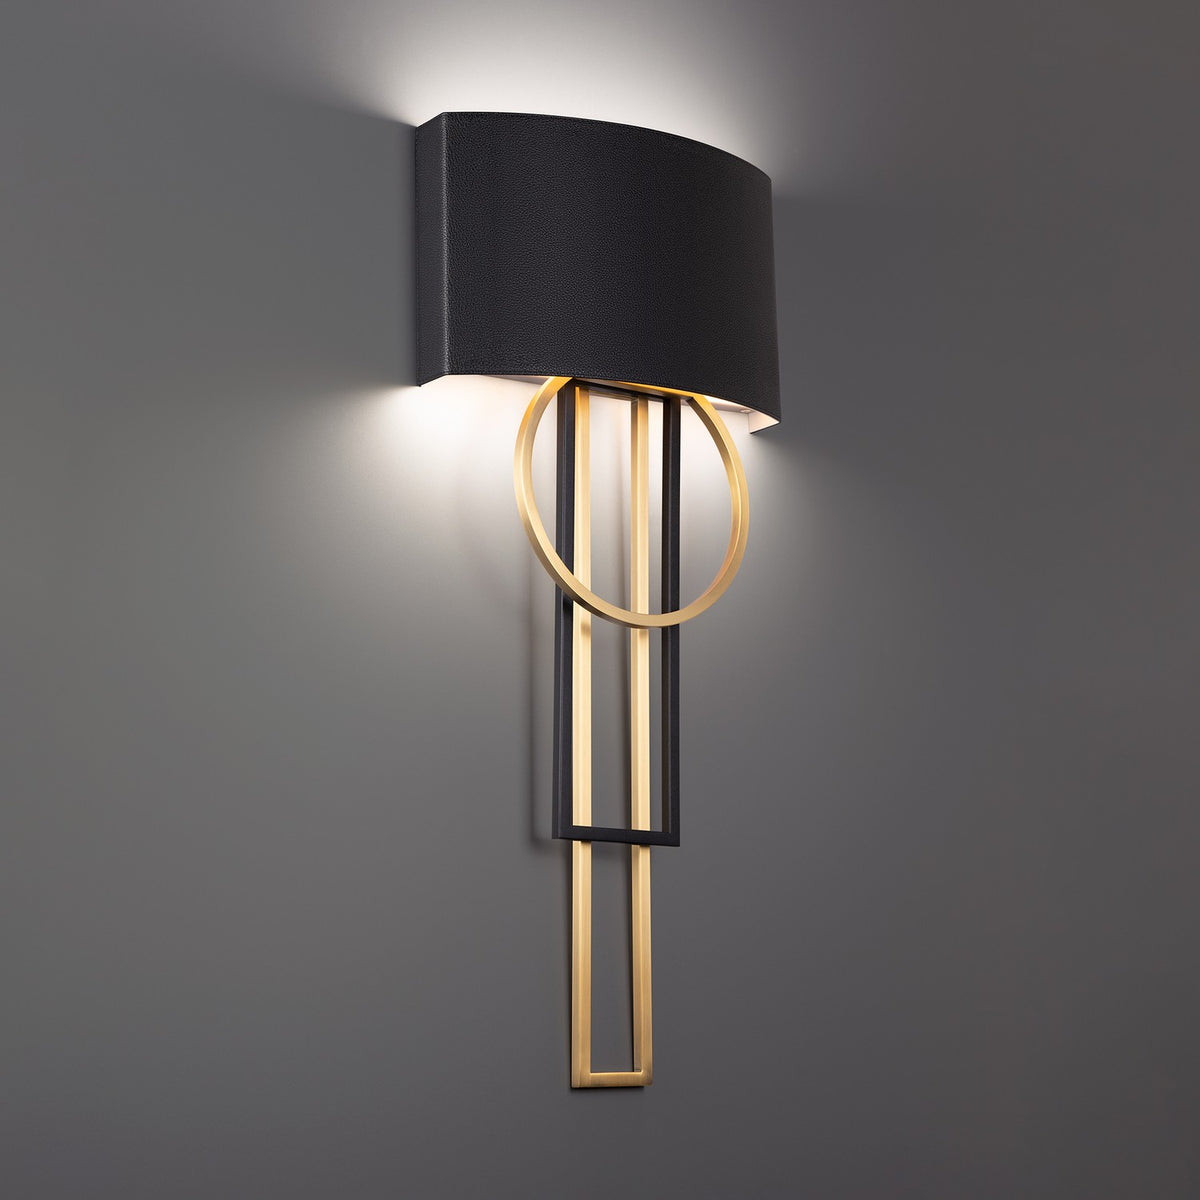 Modern Forms Canada - WS-80332-BK/AB - LED Wall Sconce - Sartre - Black & Aged Brass